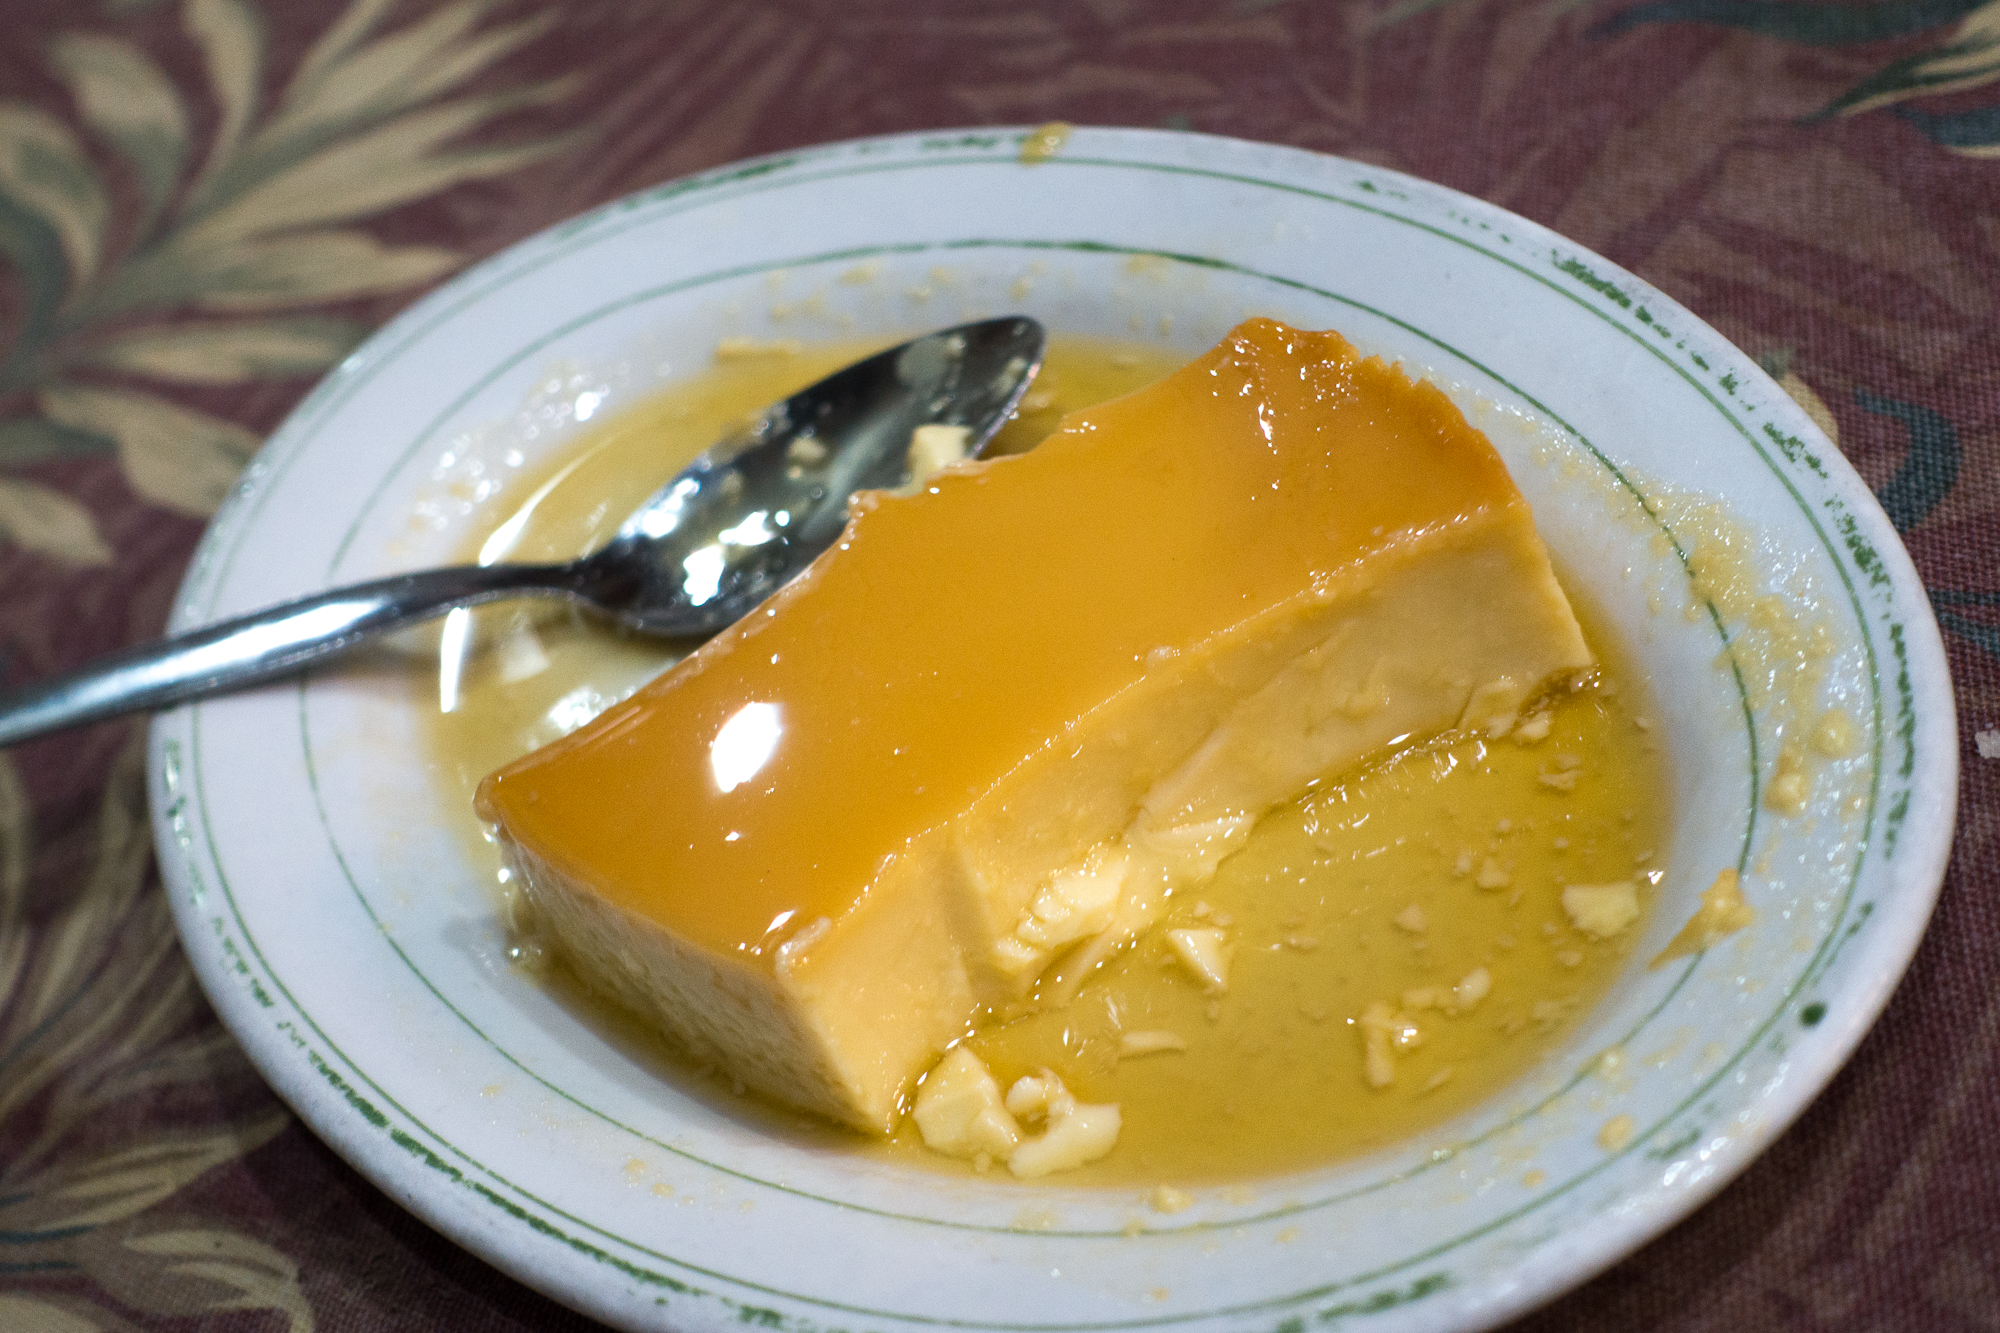 This leche flan